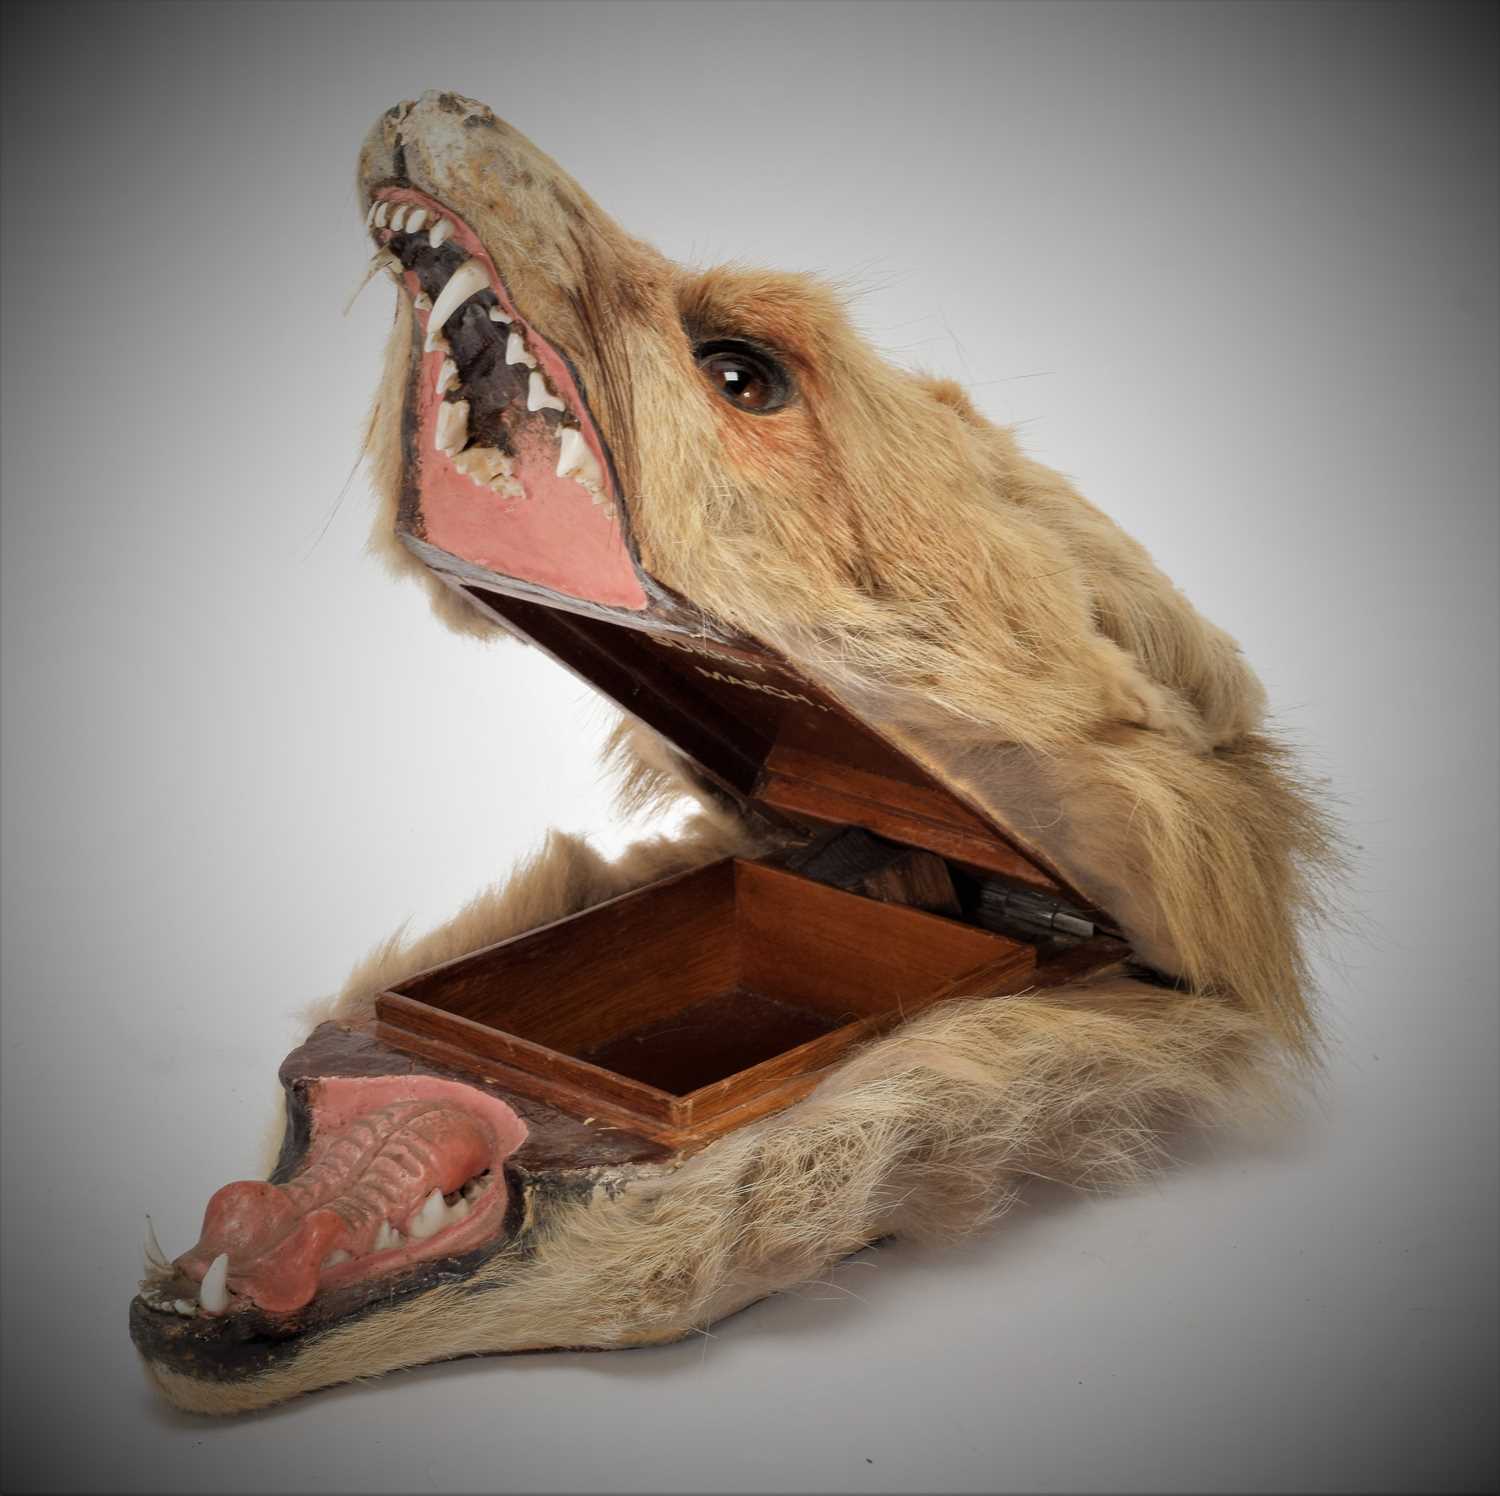 Taxidermy: A Red Fox Mask Cigarette Box, (Vulpes vulpes), by Army and Navy Stores, Naturalist